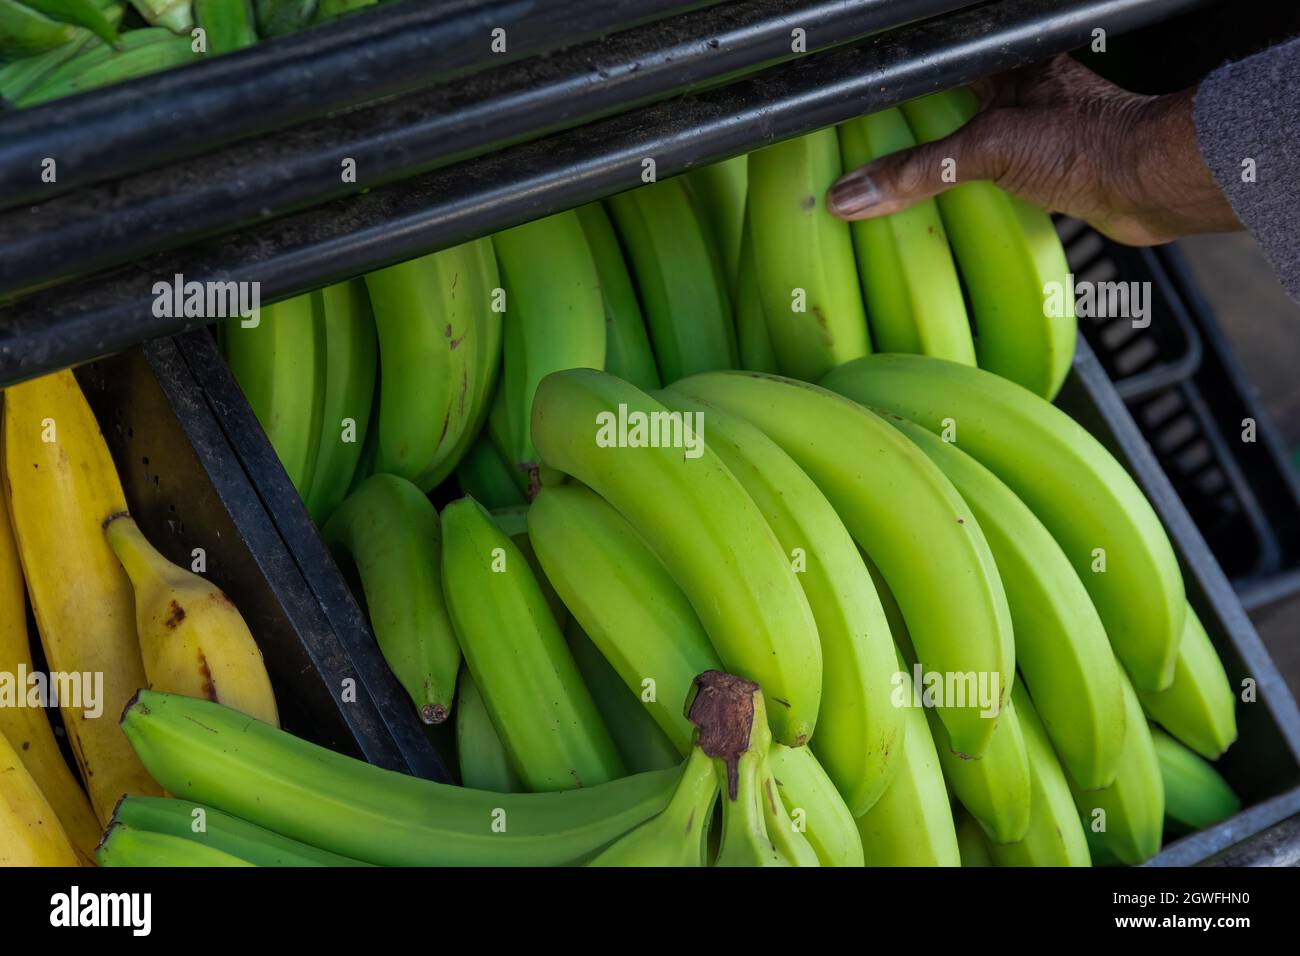 Close up of green bananas, musa x paradisiaca, on a farmers market stall in Ealing, West London Stock Photo